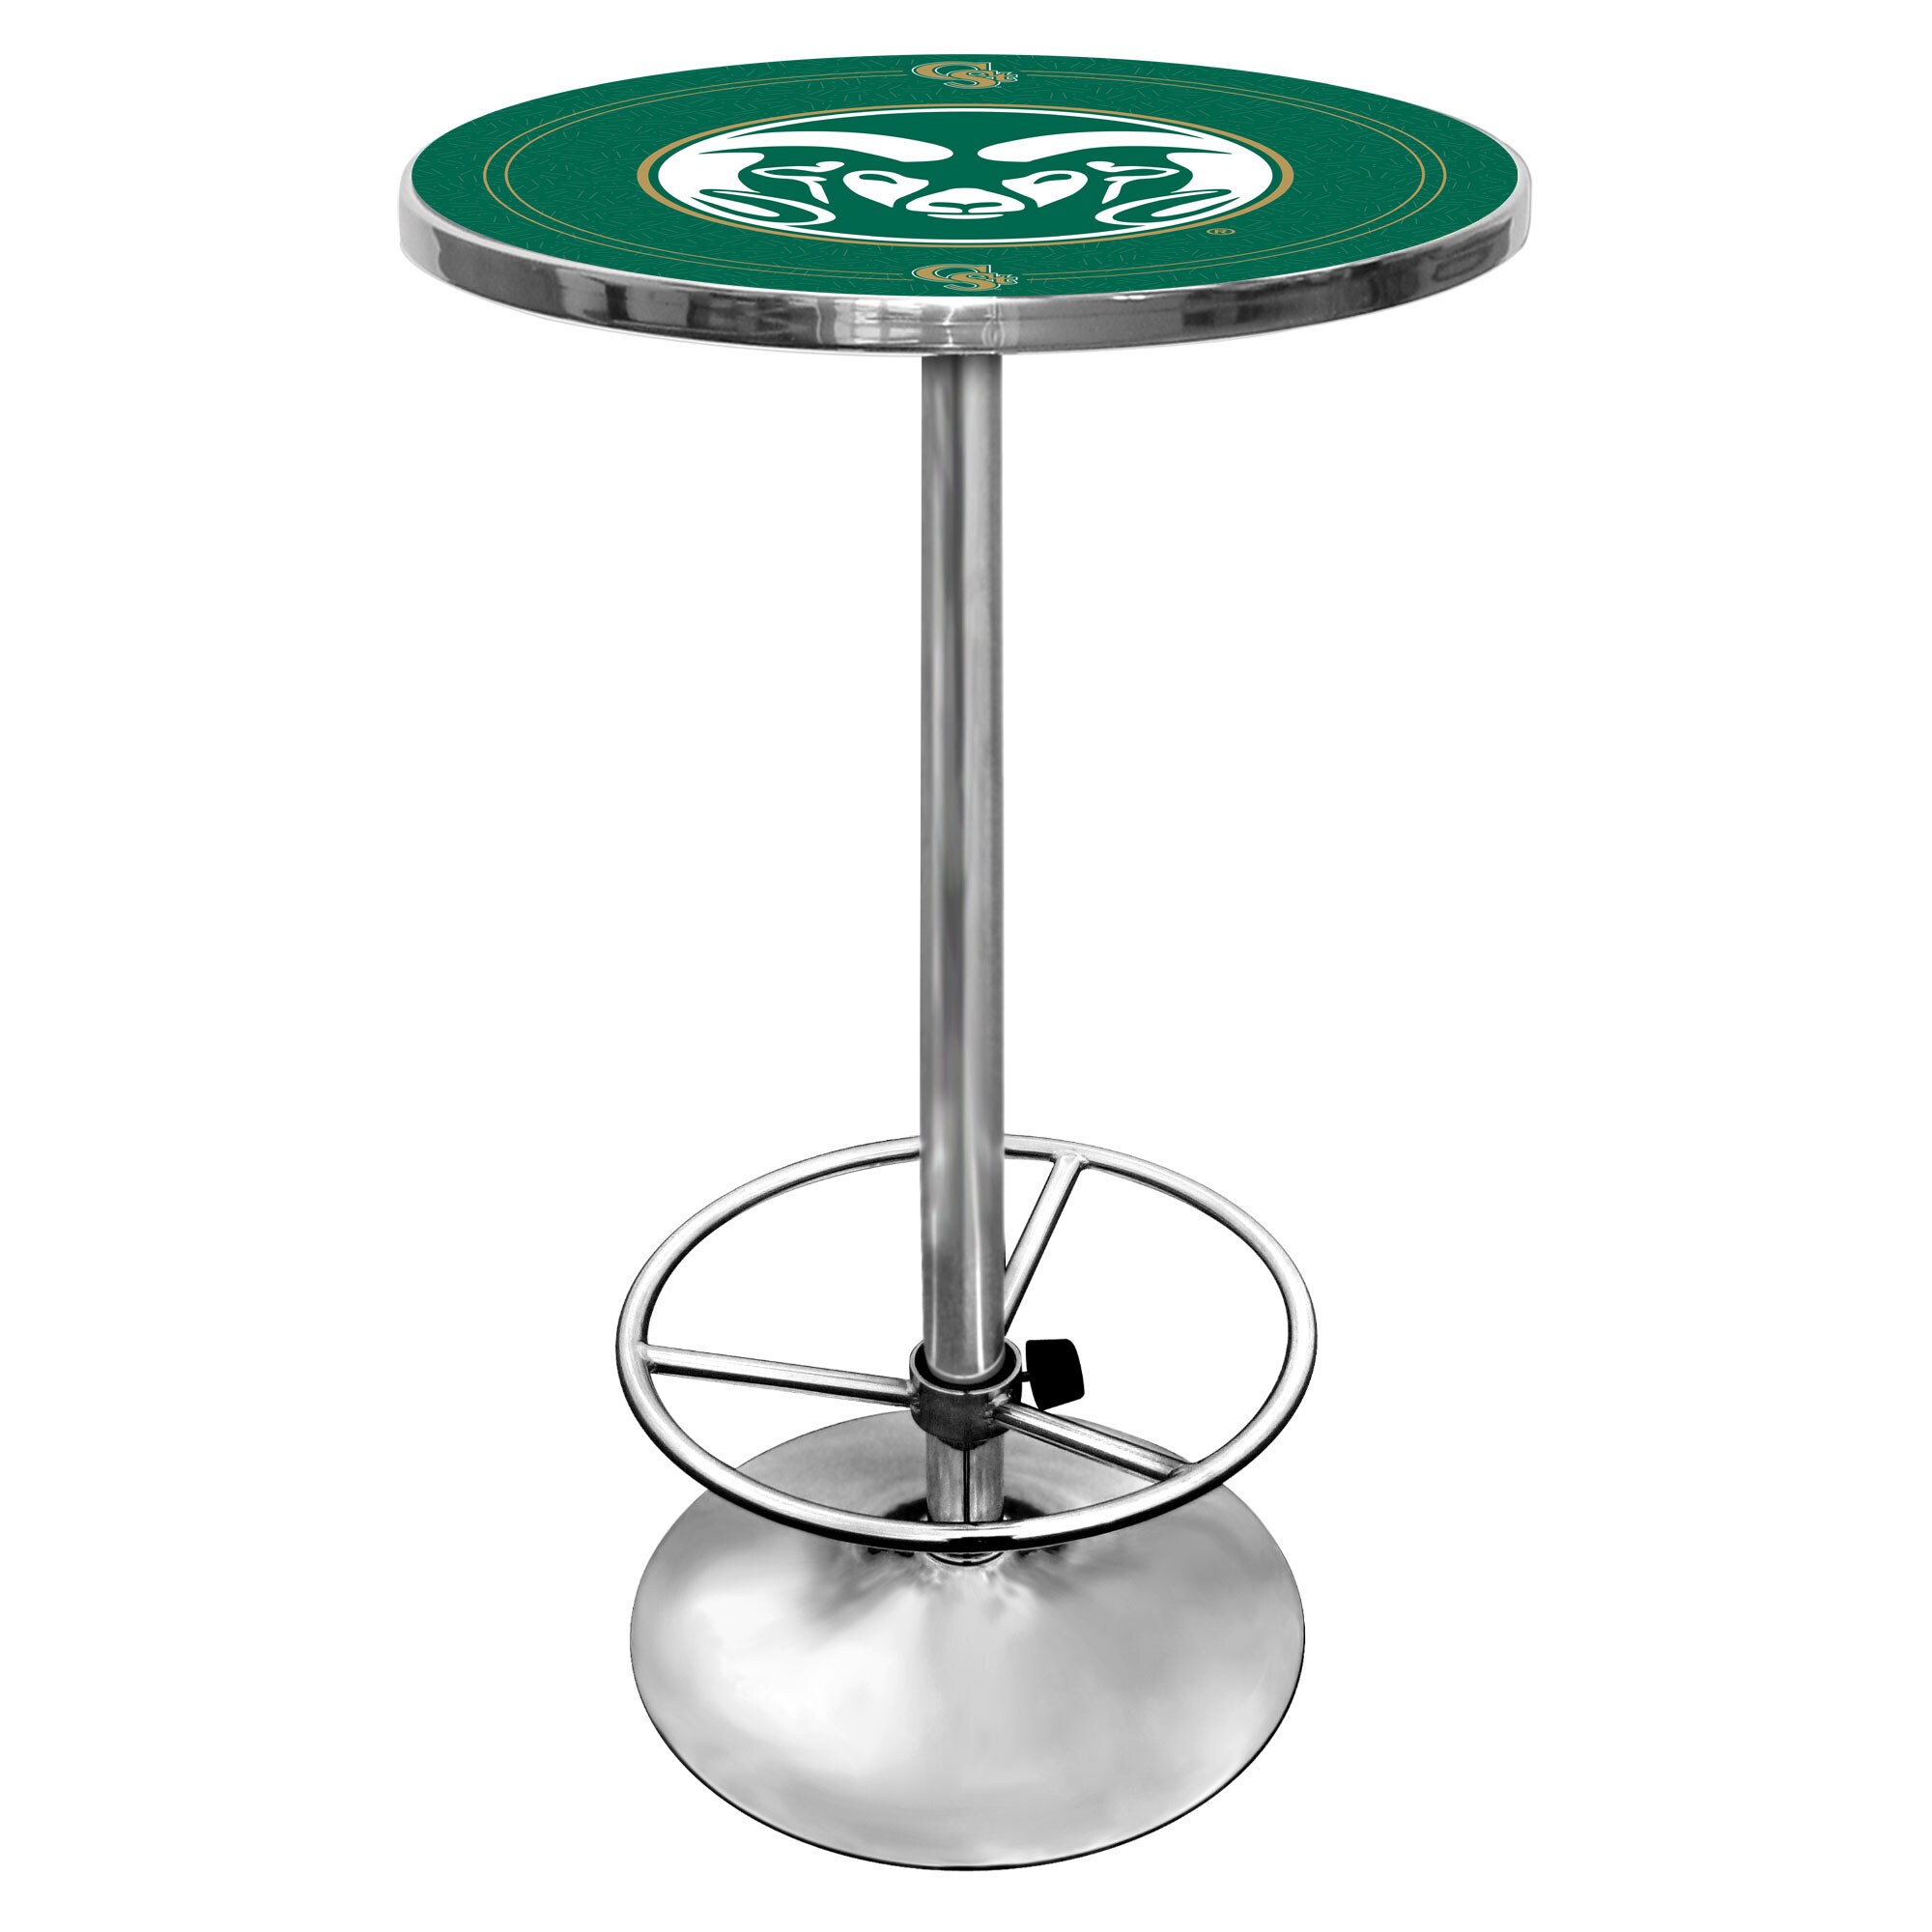 Trademark Gameroom Colorado State Rams Pub Tables Chrome Round Bar Table, Composite with Metal Base | CLC2000-COST